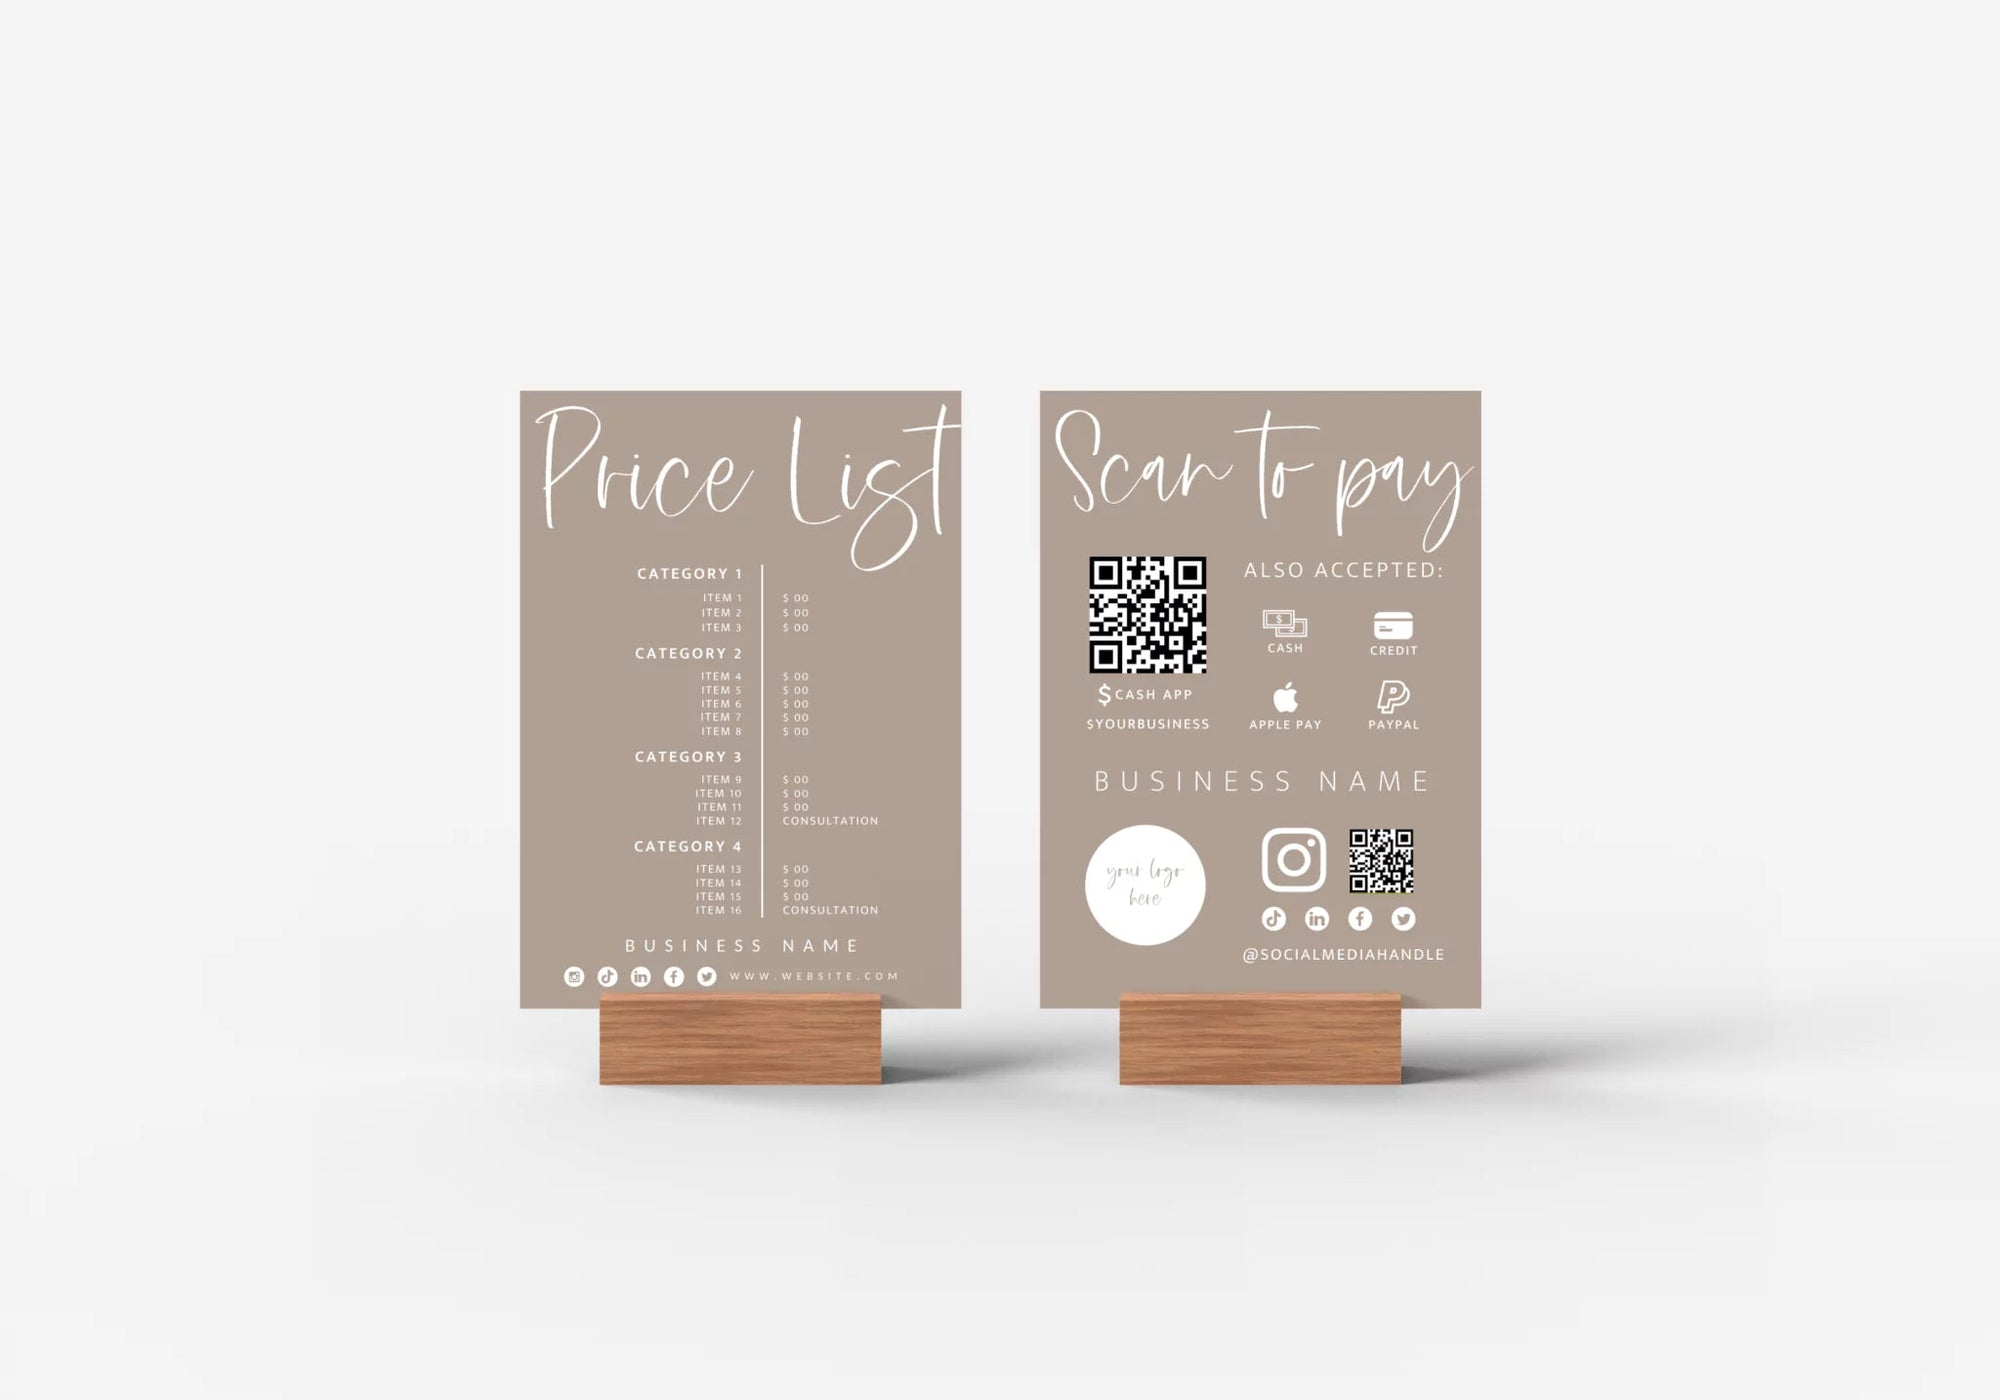 Boho Price List &amp; Scan to Pay Sign Canva Template | Gwen - Trendy Fox Studio